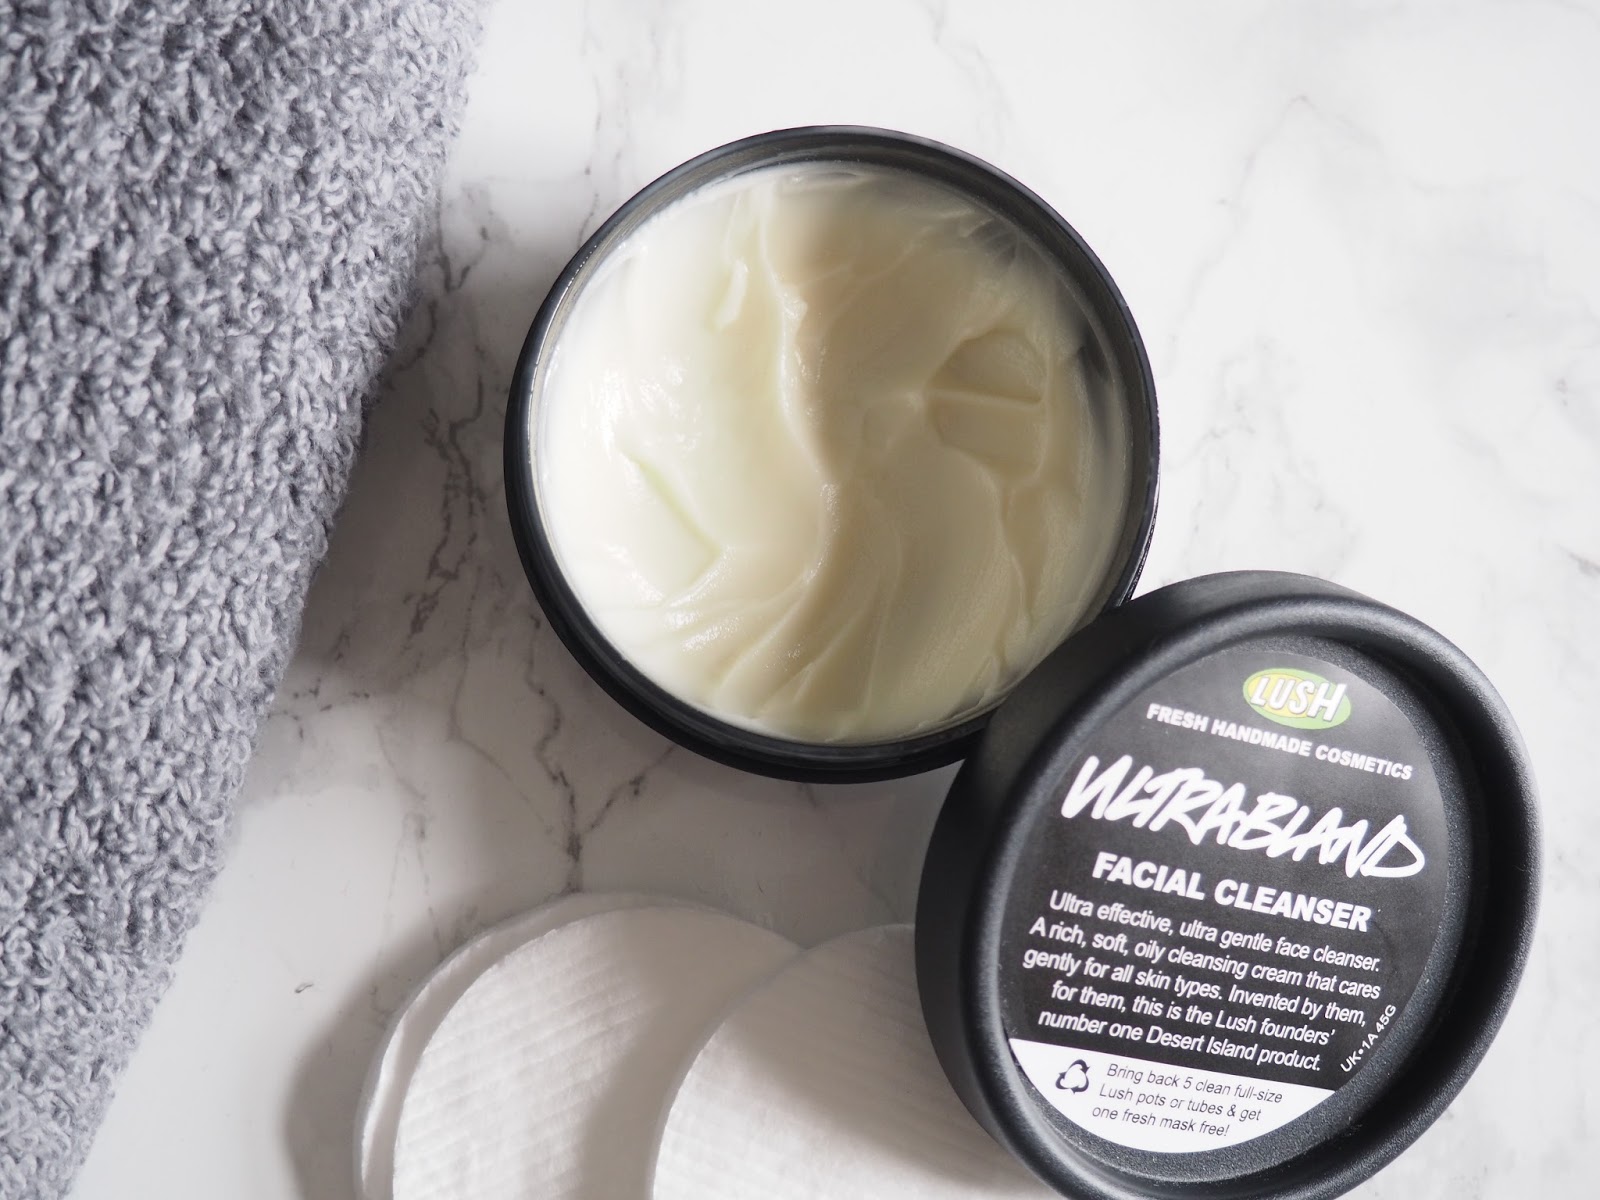 LUSH ultrabland review skincare cleanser natural organic 